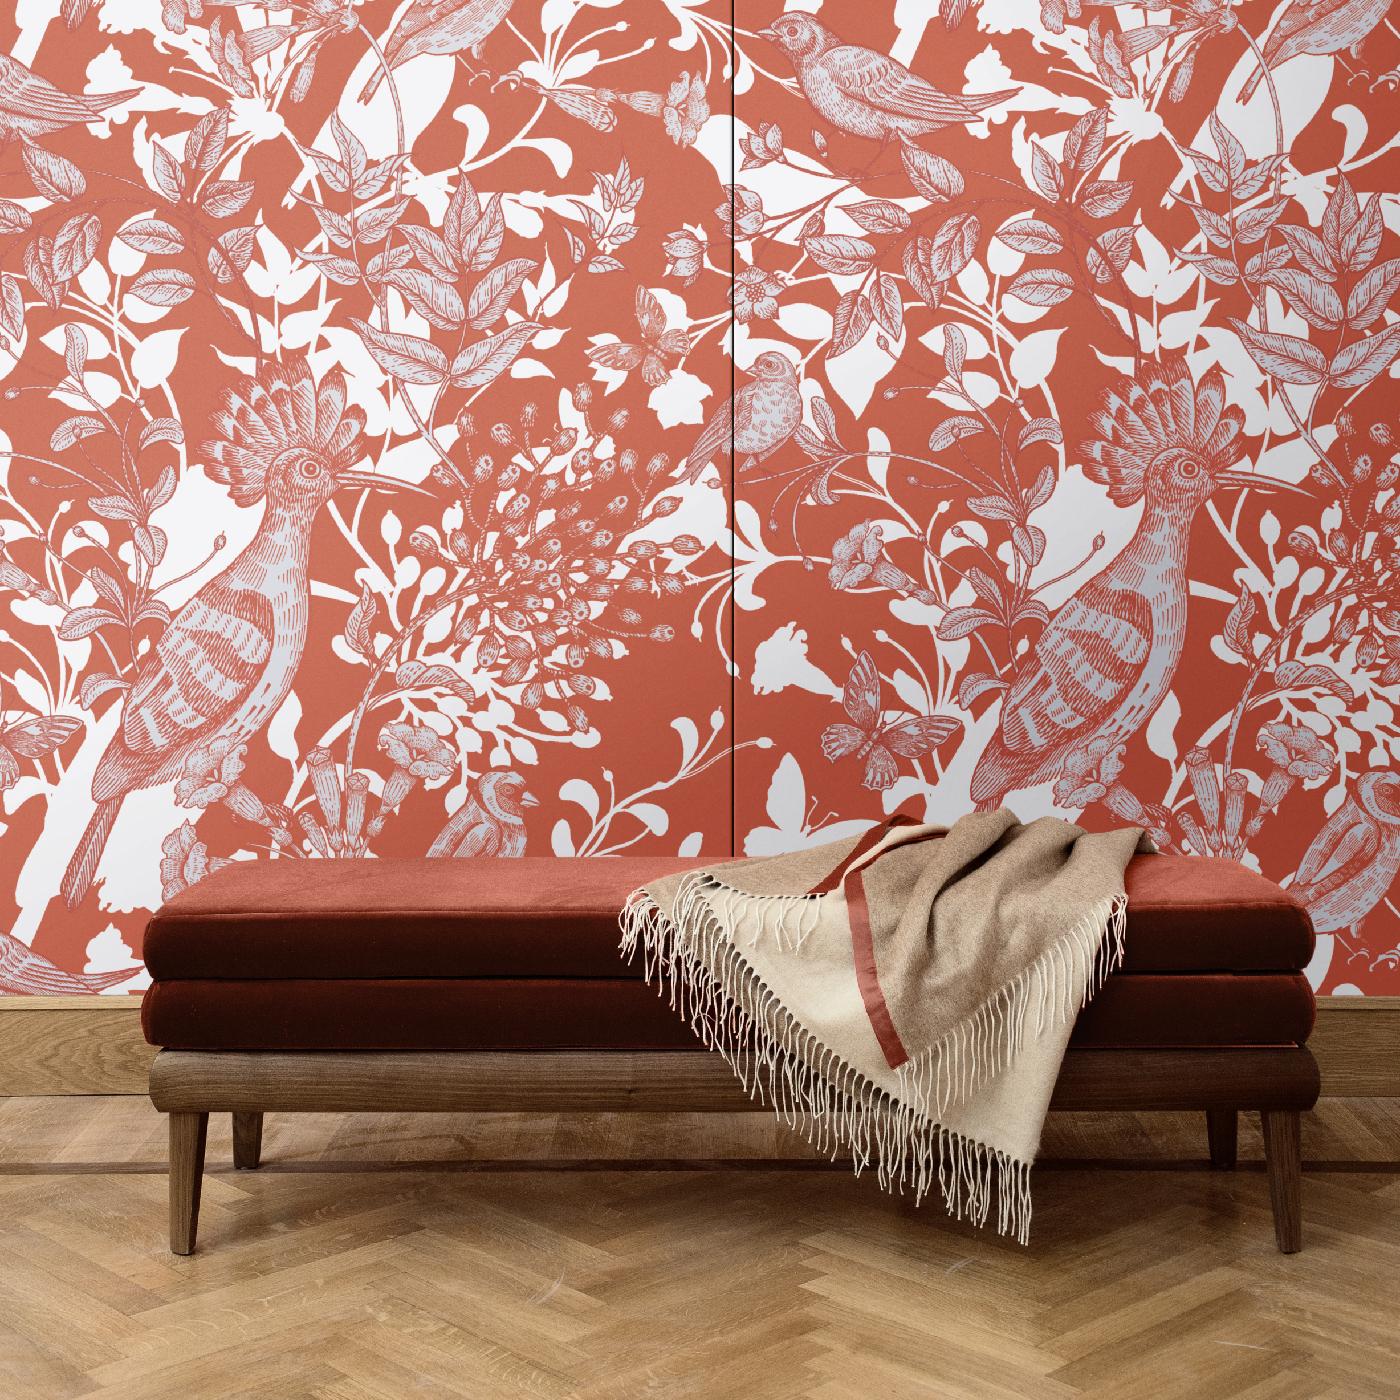 Part of the Hoopoe Birds collection and featuring a superb scene of birds, butterflies, and flowers depicted in red, all casting a white shadow on the red background, this eclectic wall covering will make a statement in any interior. It was crafted